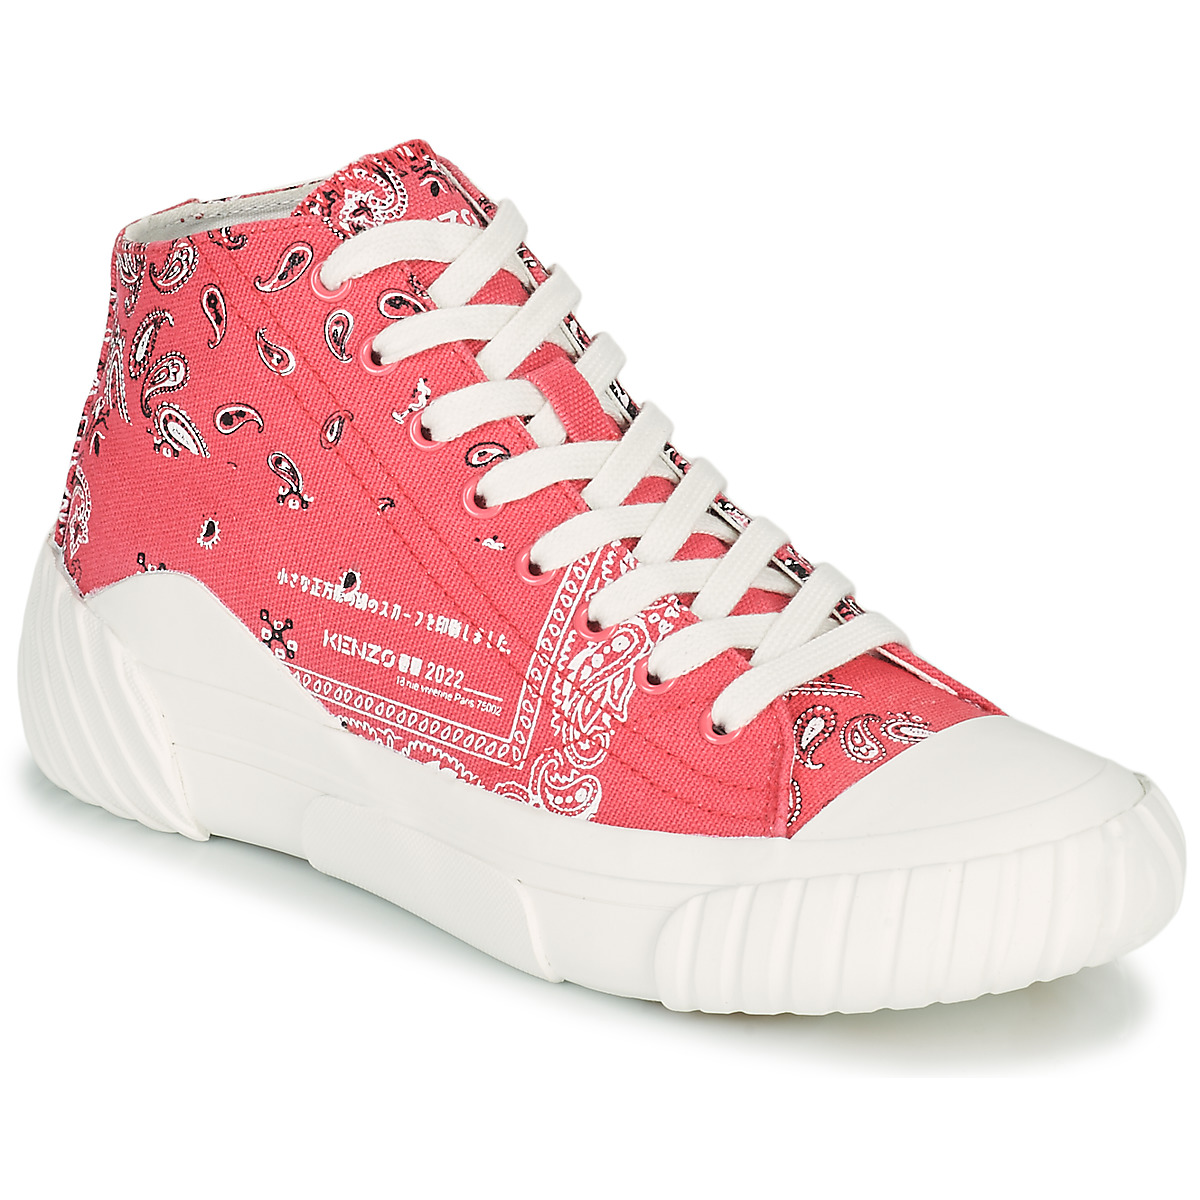 Kenzo Tiger Crest High Top Sneakers Pink